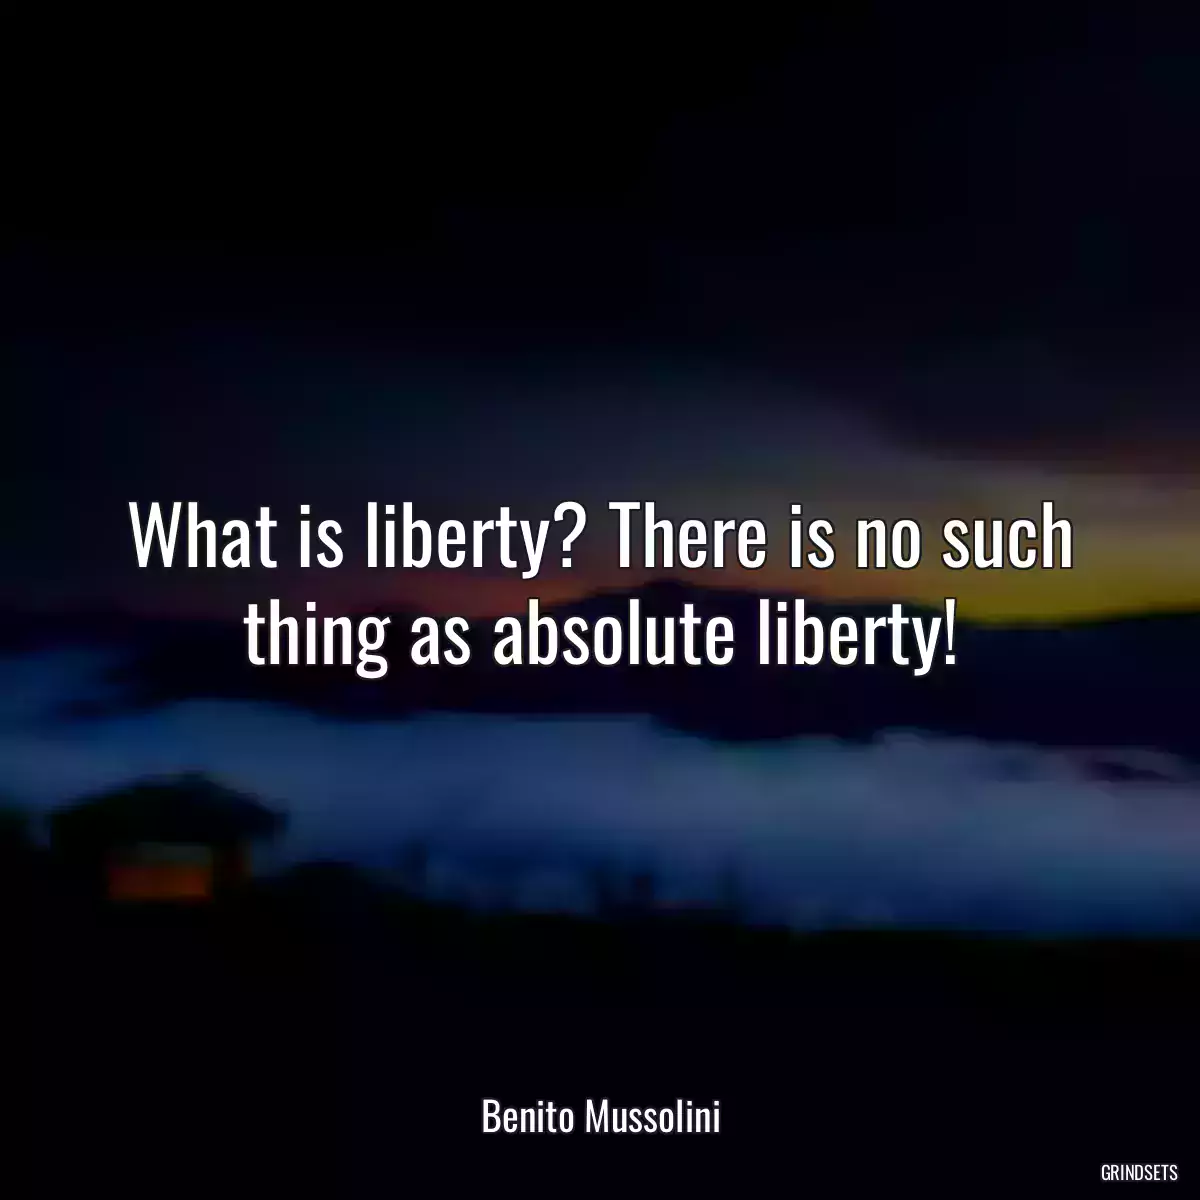 What is liberty? There is no such thing as absolute liberty!